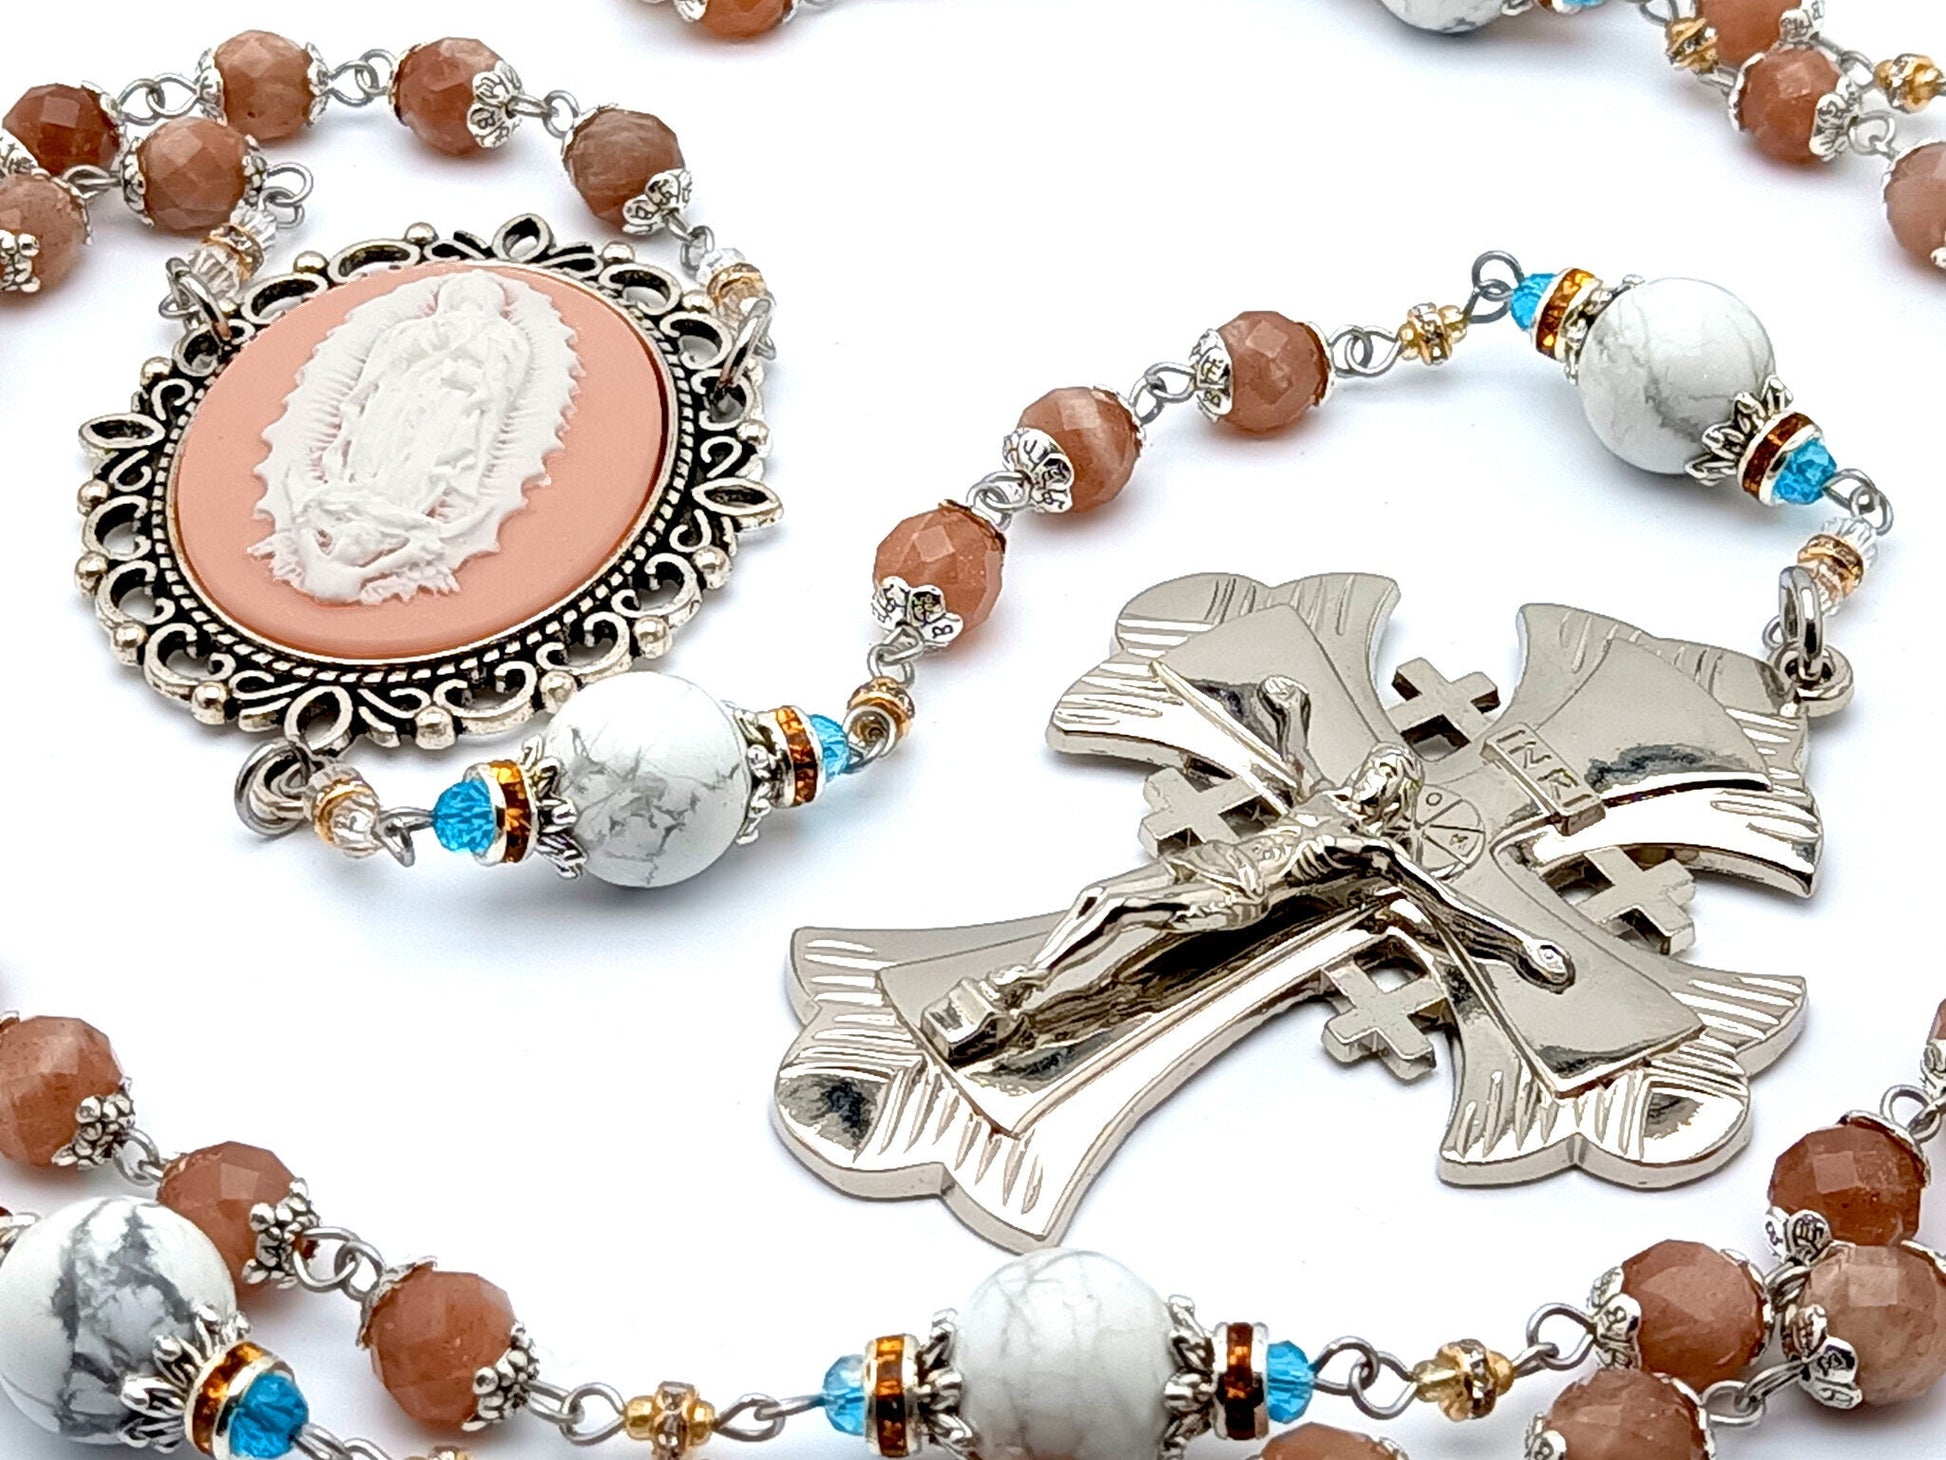 Our Lady of Guadalupe cameo unique rosary beads with faceted moonstone gemstone and howlite marbled beads and large silver crucifix.